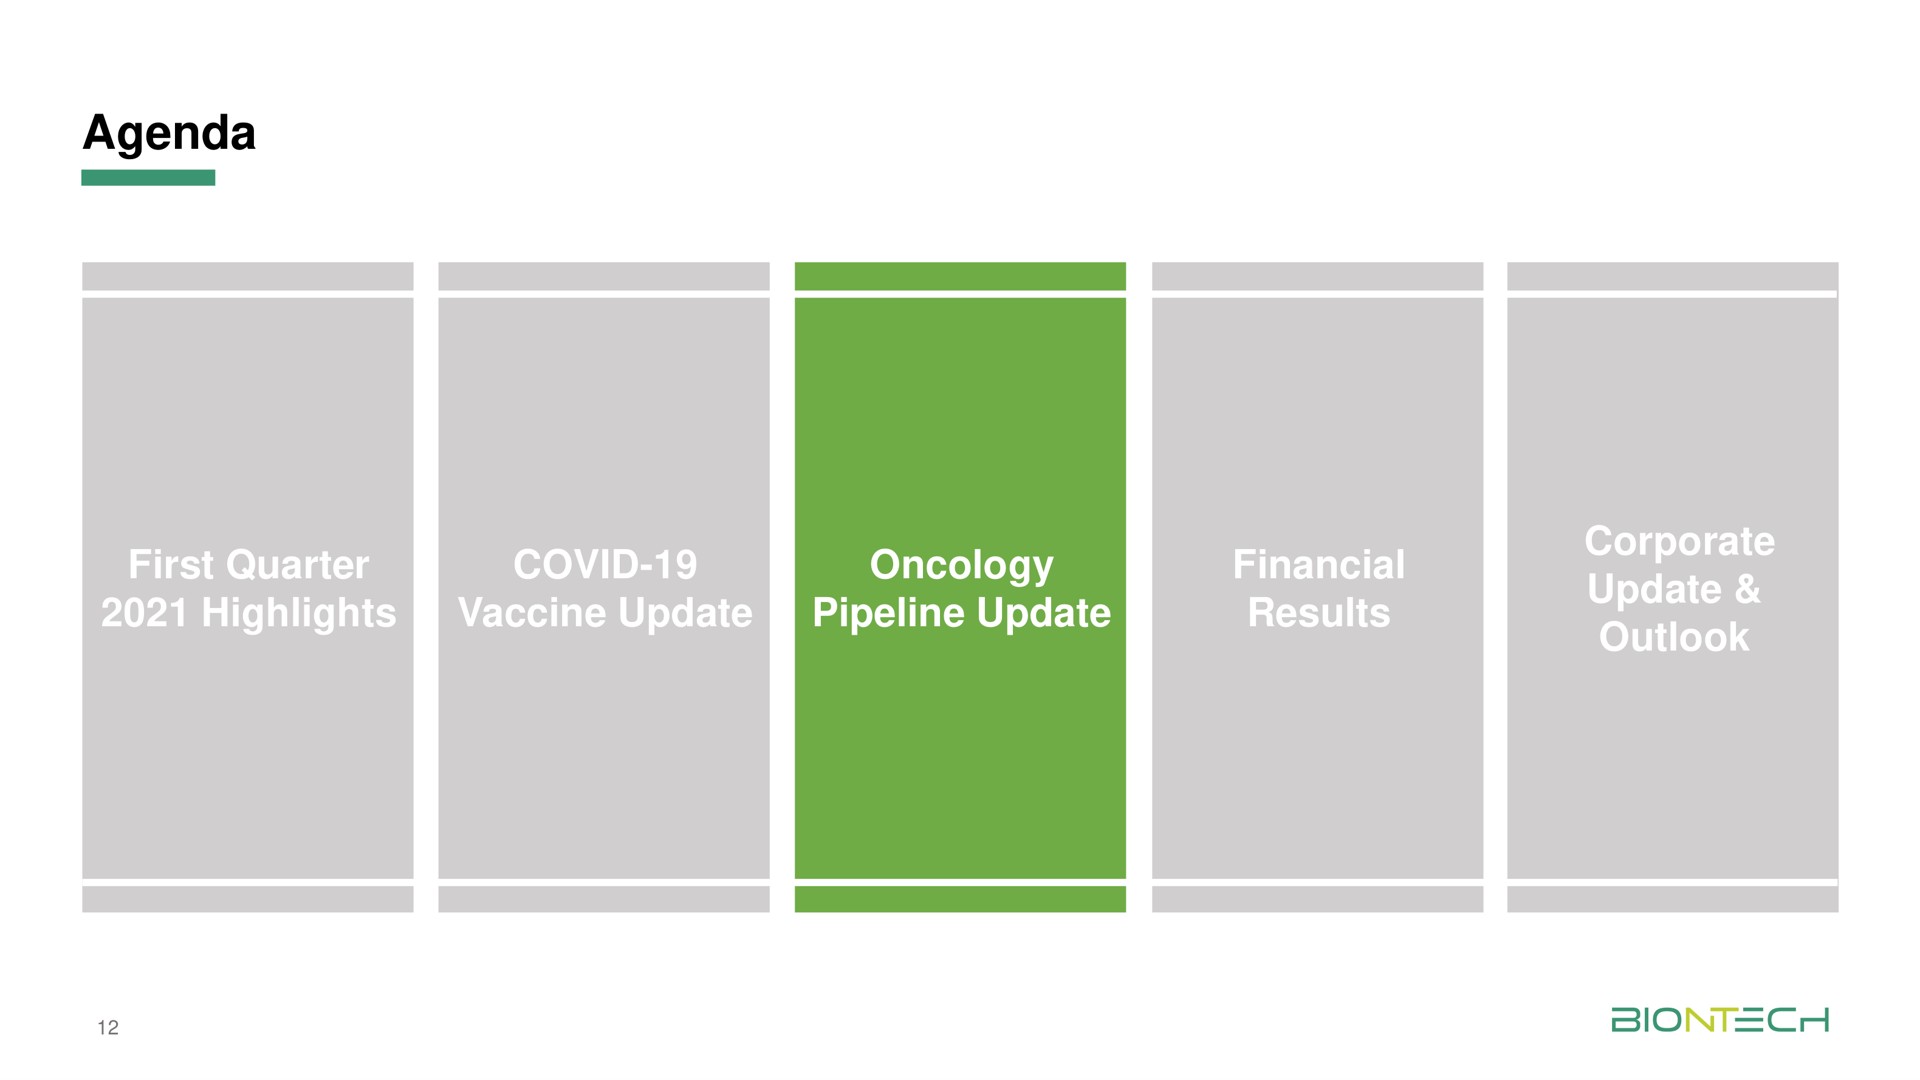 agenda first quarter highlights covid vaccine update oncology pipeline update financial results corporate update outlook | BioNTech